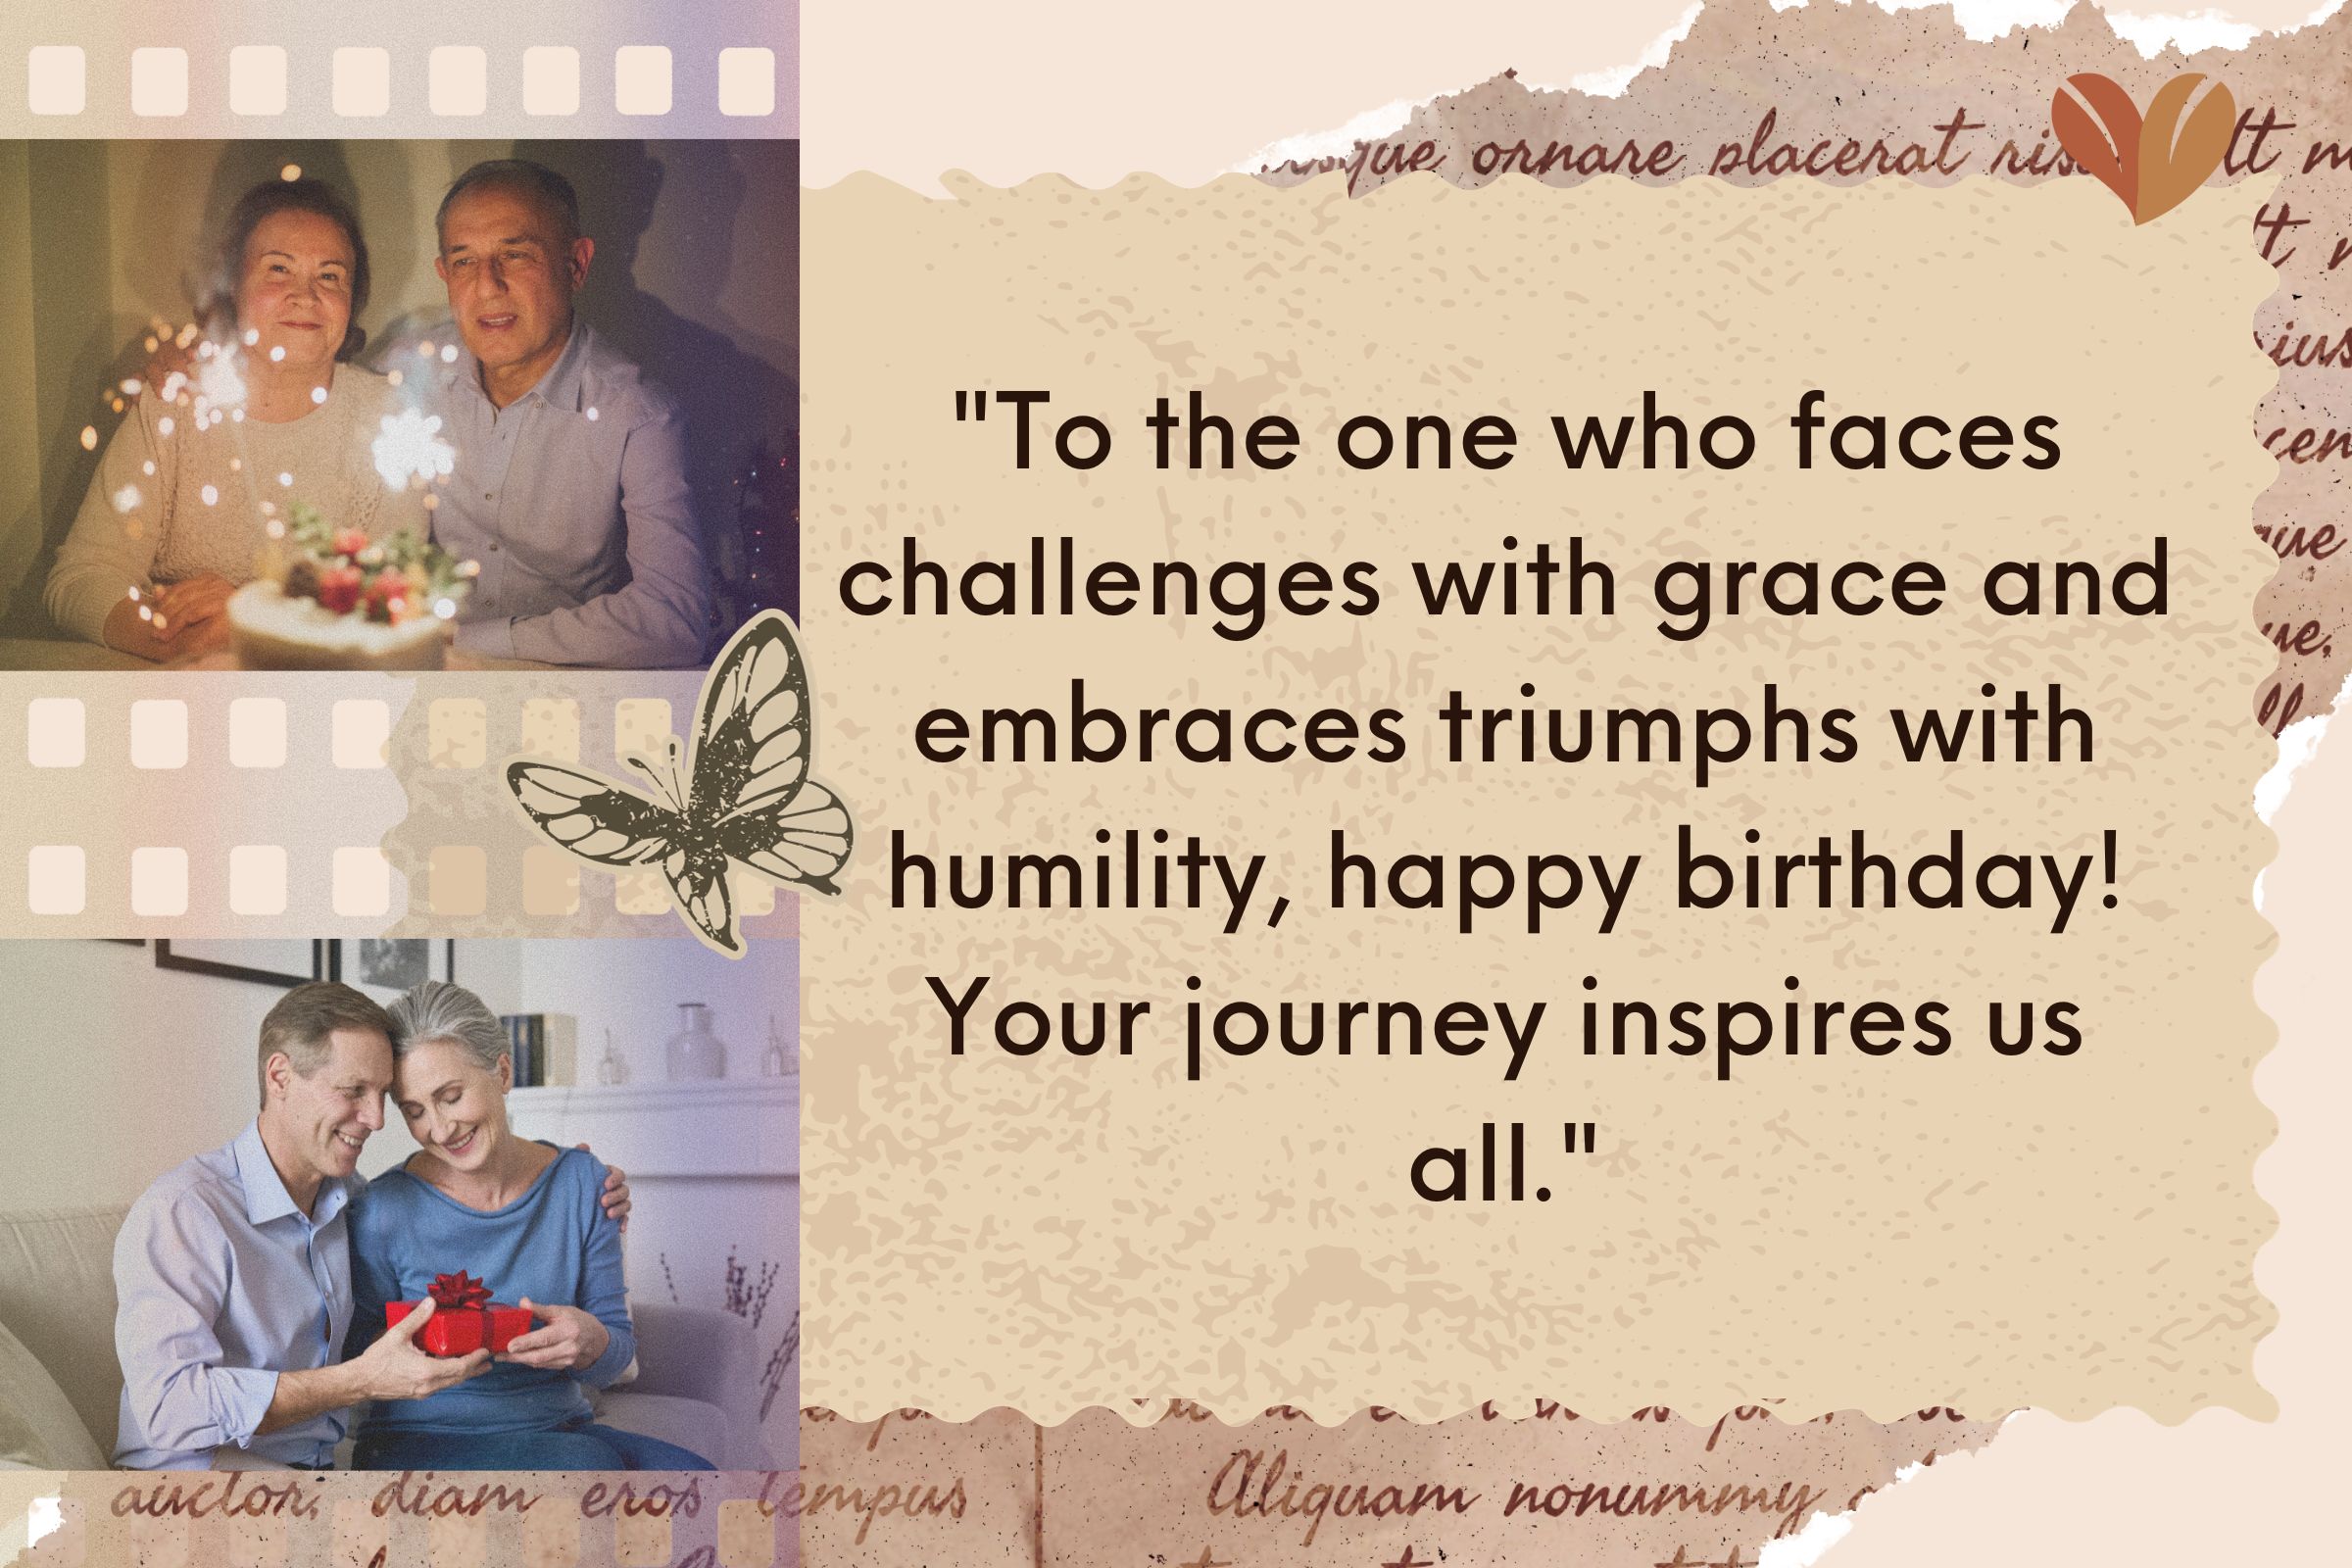 Your journey inspires all